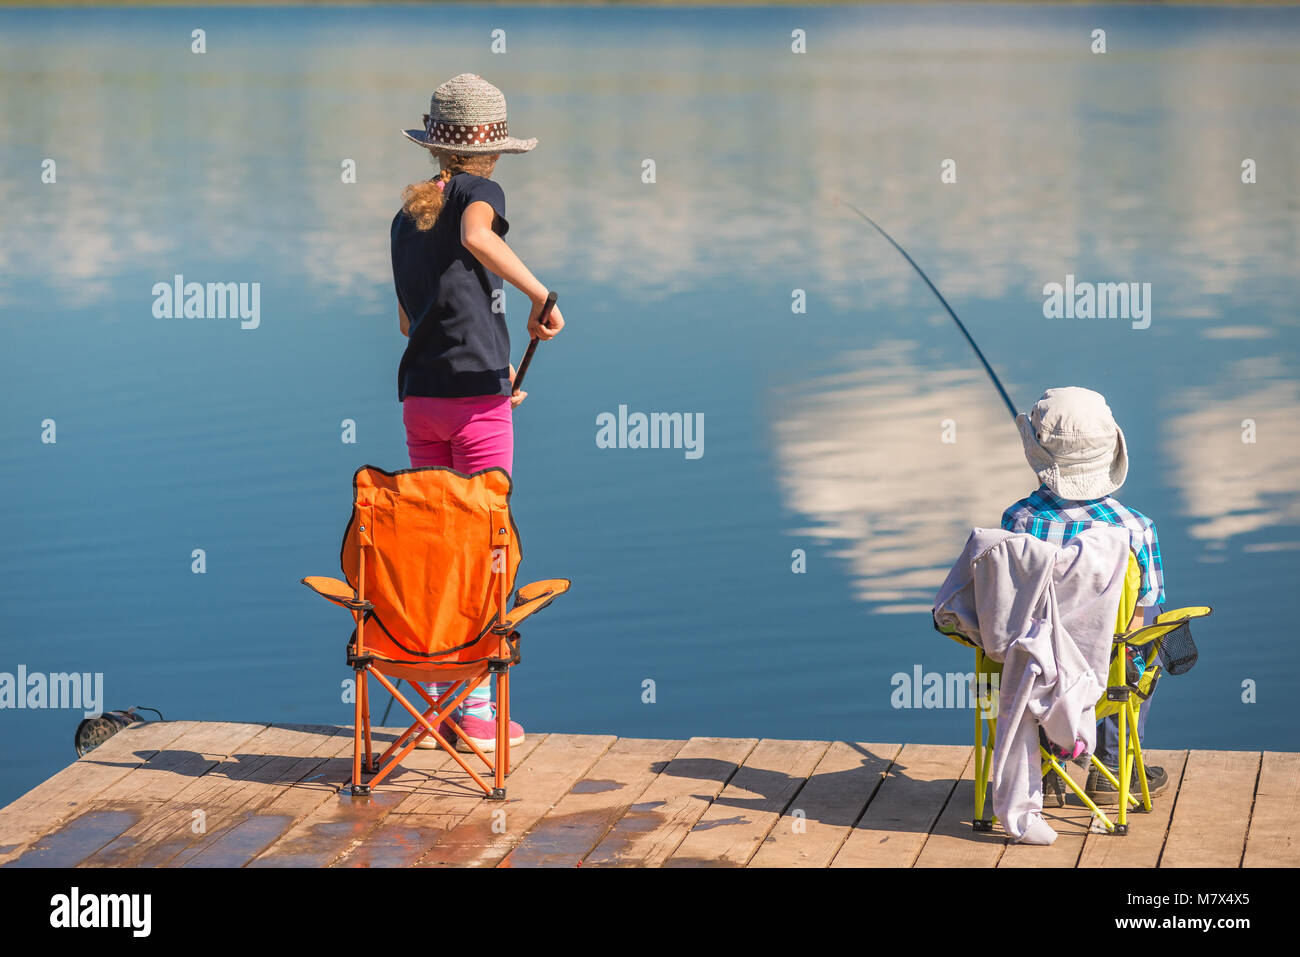 Illustration of Stickman Kids Holding Fishing Rods by the Lake Looking Up  Stock Photo - Alamy